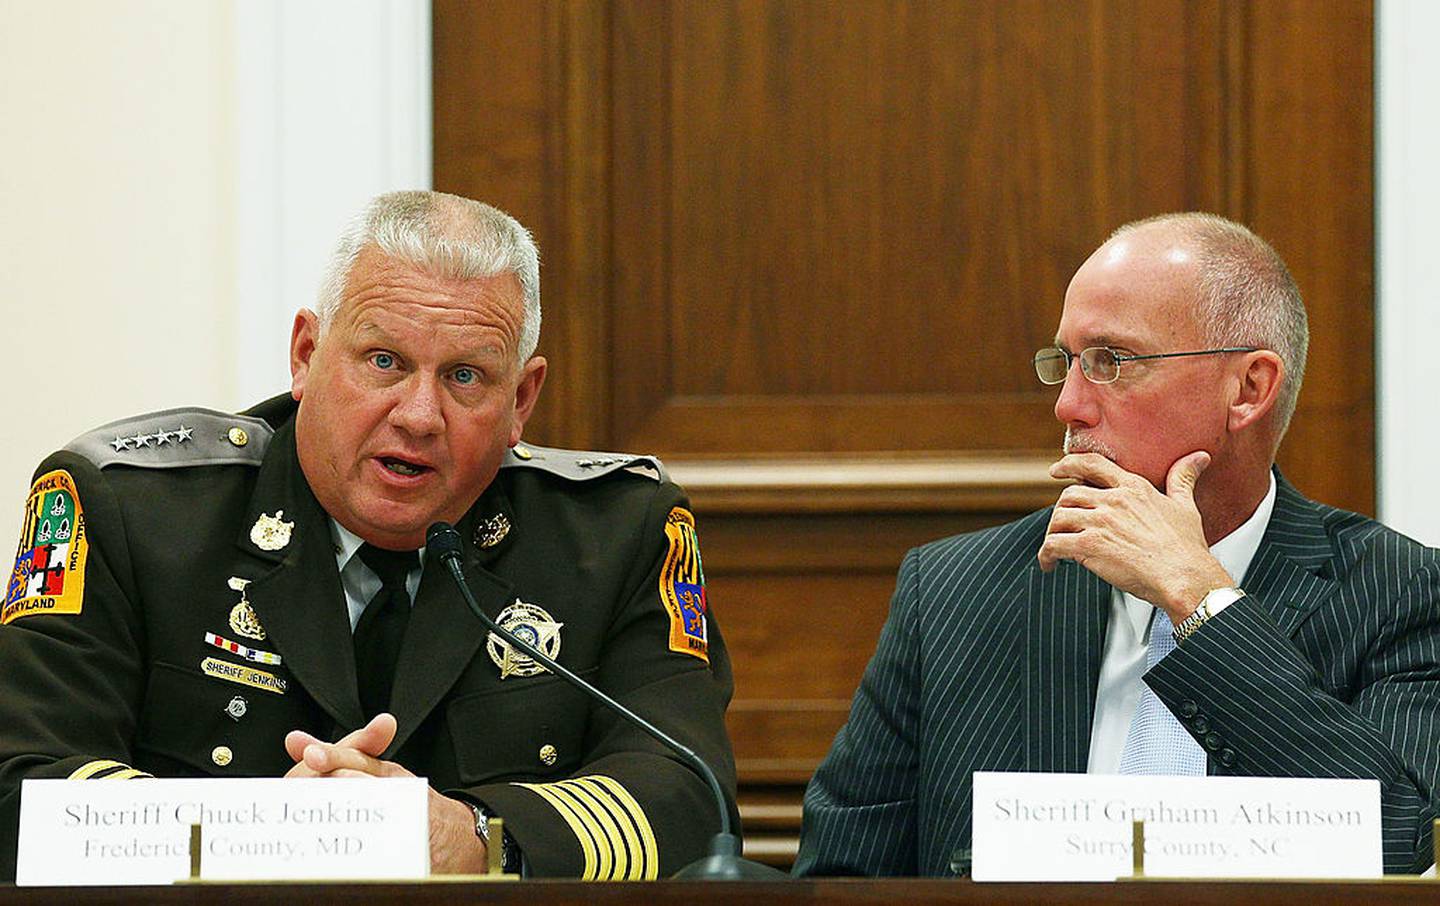 WASHINGTON, DC - OCTOBER 12: Sheriff Chuck Jenkins (L), of Frederick County, MD., and Sheriff Graham Atkinson (R), of Surry County, NC., participate in a discussion on immigration October 12, 2011 in Washington, DC. The Center for Immigration Studies and the House Immigration Reform Caucus hosted the discussion with law enforcement agencies from local municipalities dealing with crime problems that are direct result from failure to control the border, and from lax enforcement of immigration laws.